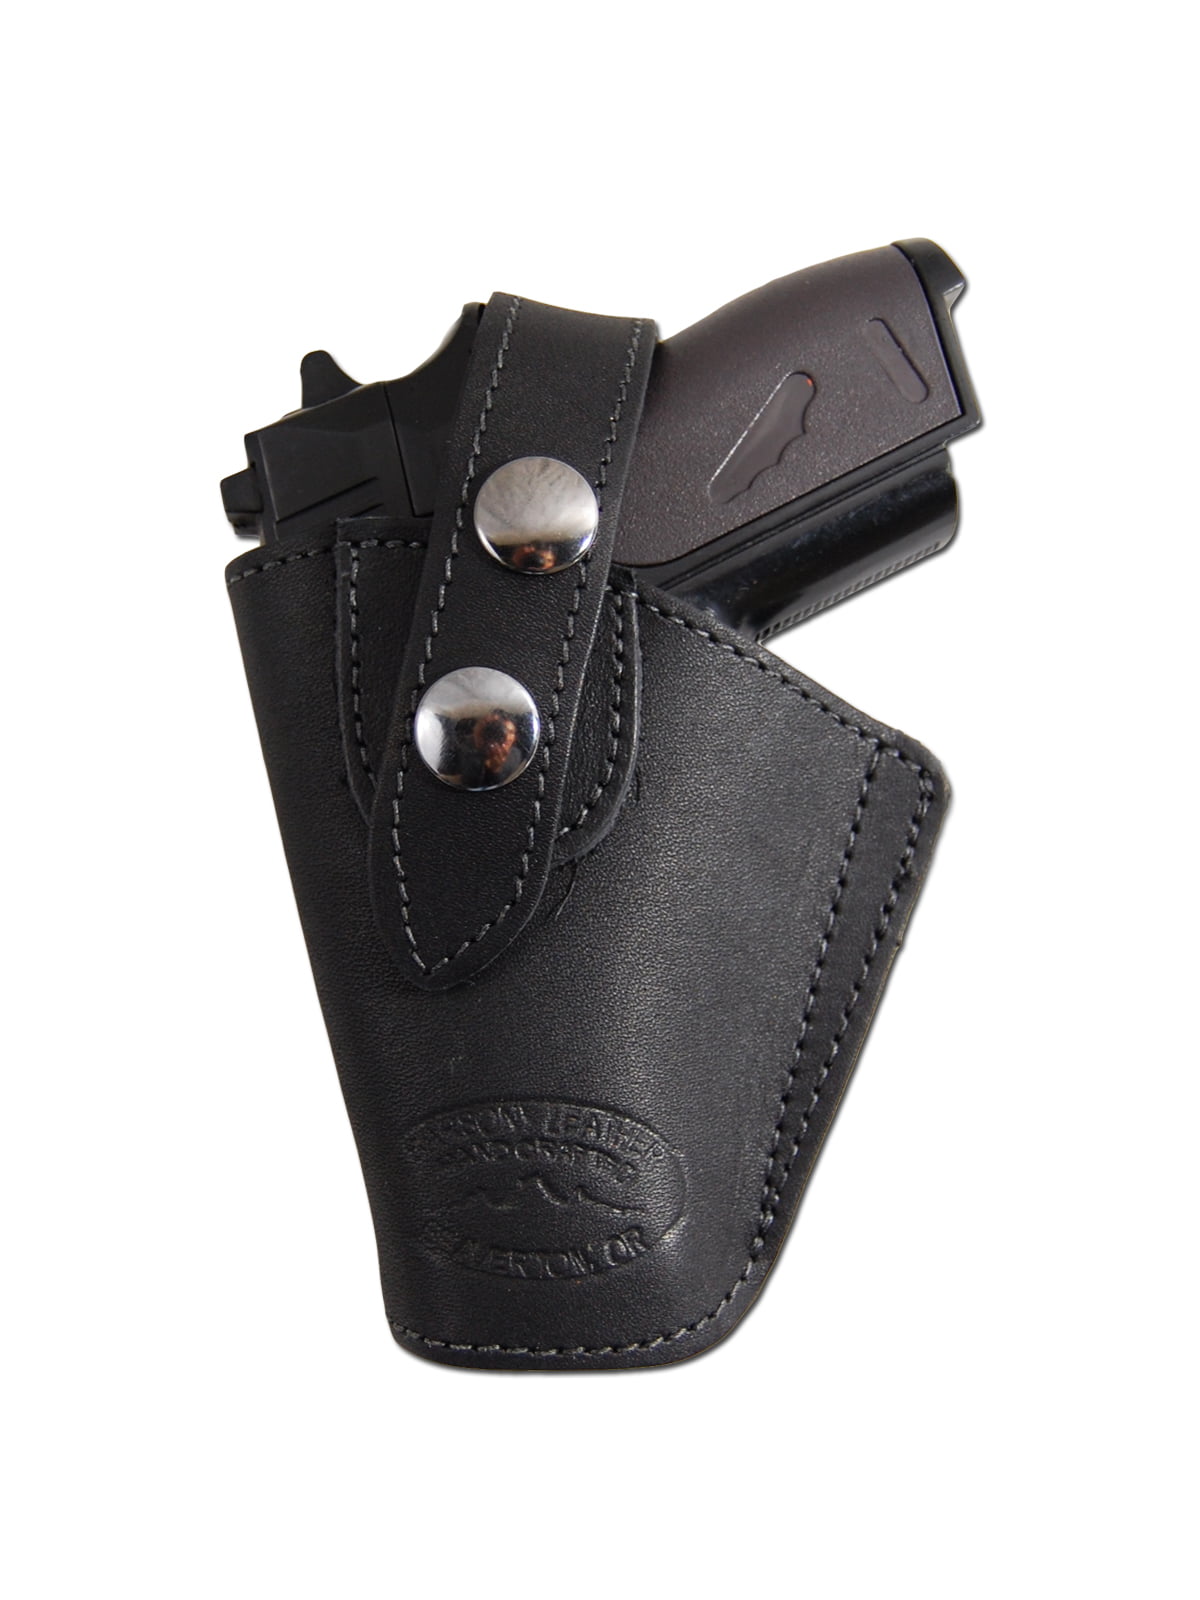 Black PU Leather Belt Holster for WALTHER PPK/S.380 ACP New RIGHT HAND 